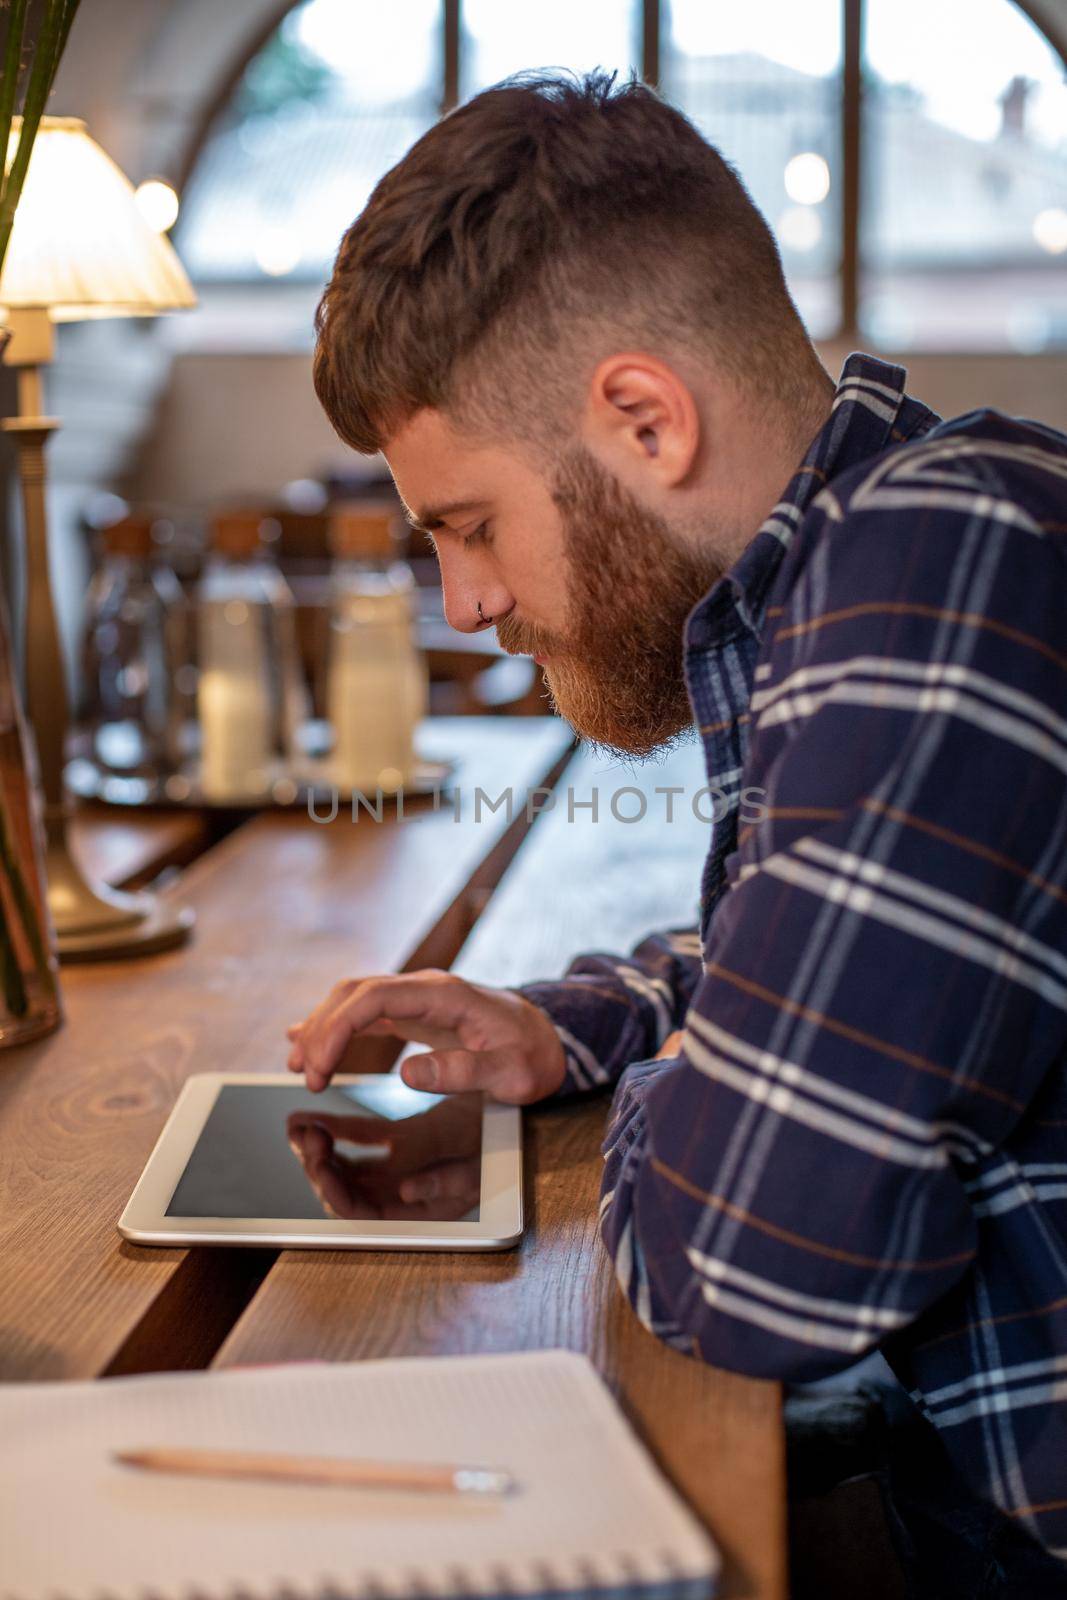 Freelancer dressed in casual outfit focus on reading news and looking on digital tablet while sitting in cozy urban cafe. Young man using modern technology for search job vacancy in internet